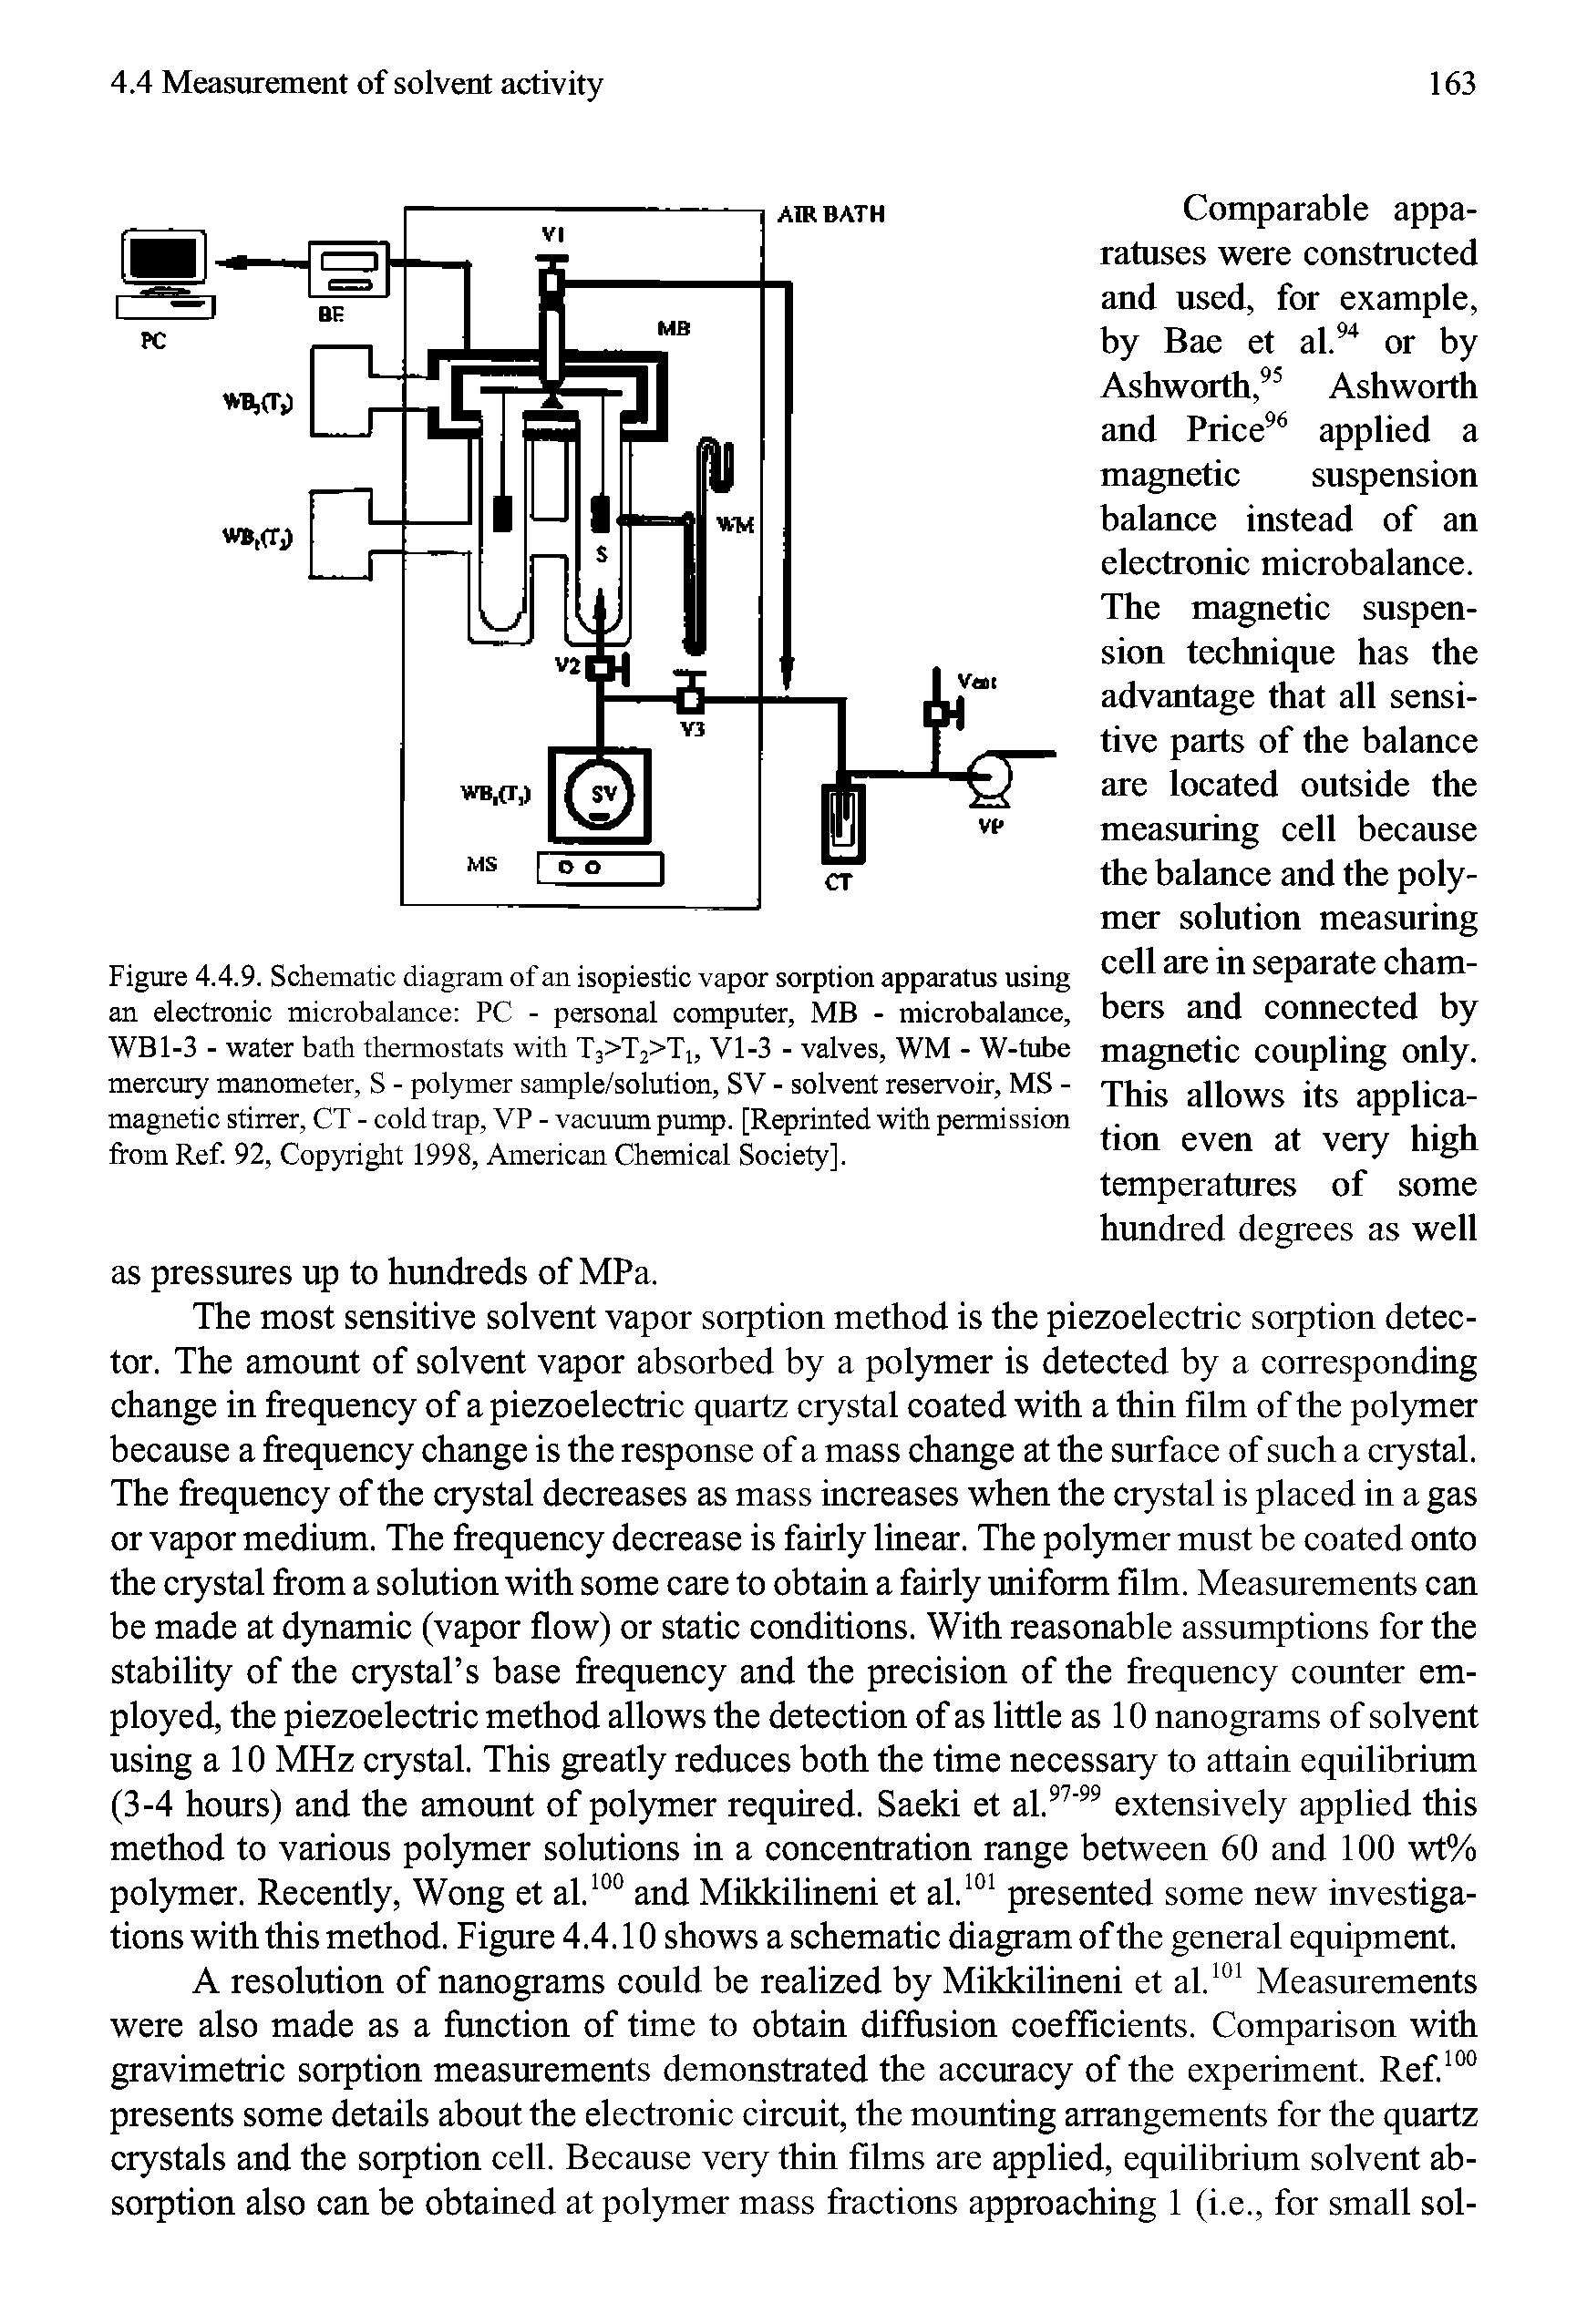 Figure 4.4.9. Schematic diagram of an isopiestic vapor sorption apparatus using an electronic microbalance PC - personal computer, MB - microbalance, WBl-3 - water bath thermostats with T3>T2>Ti, Vl-3 - valves, WM - W-tube mercury manometer, S - polymer sample/solution, SV - solvent reservoir, MS -magnetic stirrer, CT - cold trap, VP - vacuum pump. [Reprinted with permissitm from Ref. 92, Copyright 1998, American Chemical Society].